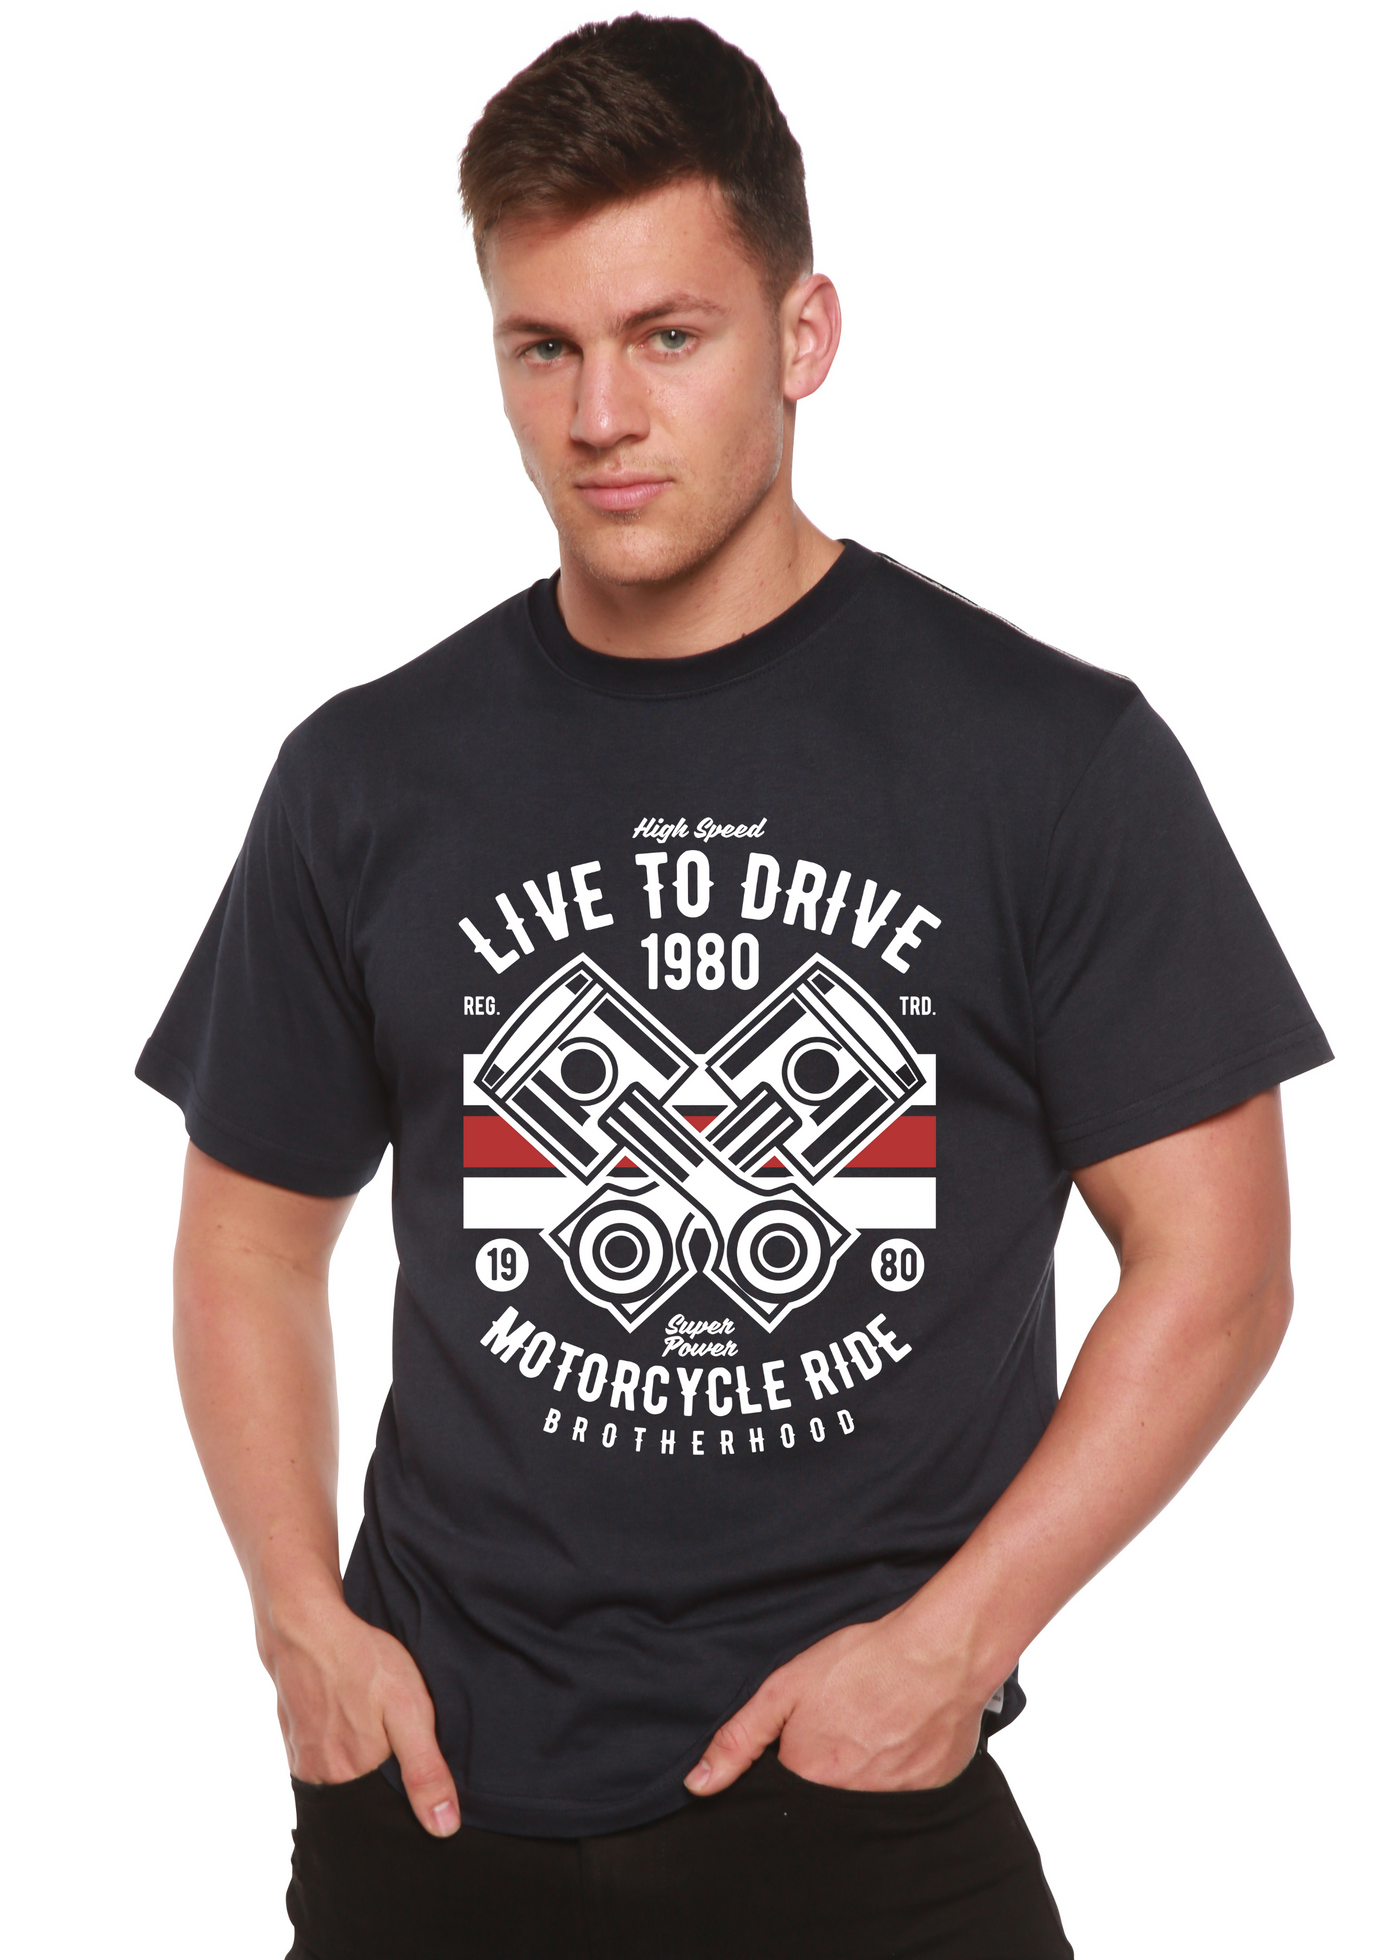 Live To Ride 1980 men's bamboo tshirt navy blue